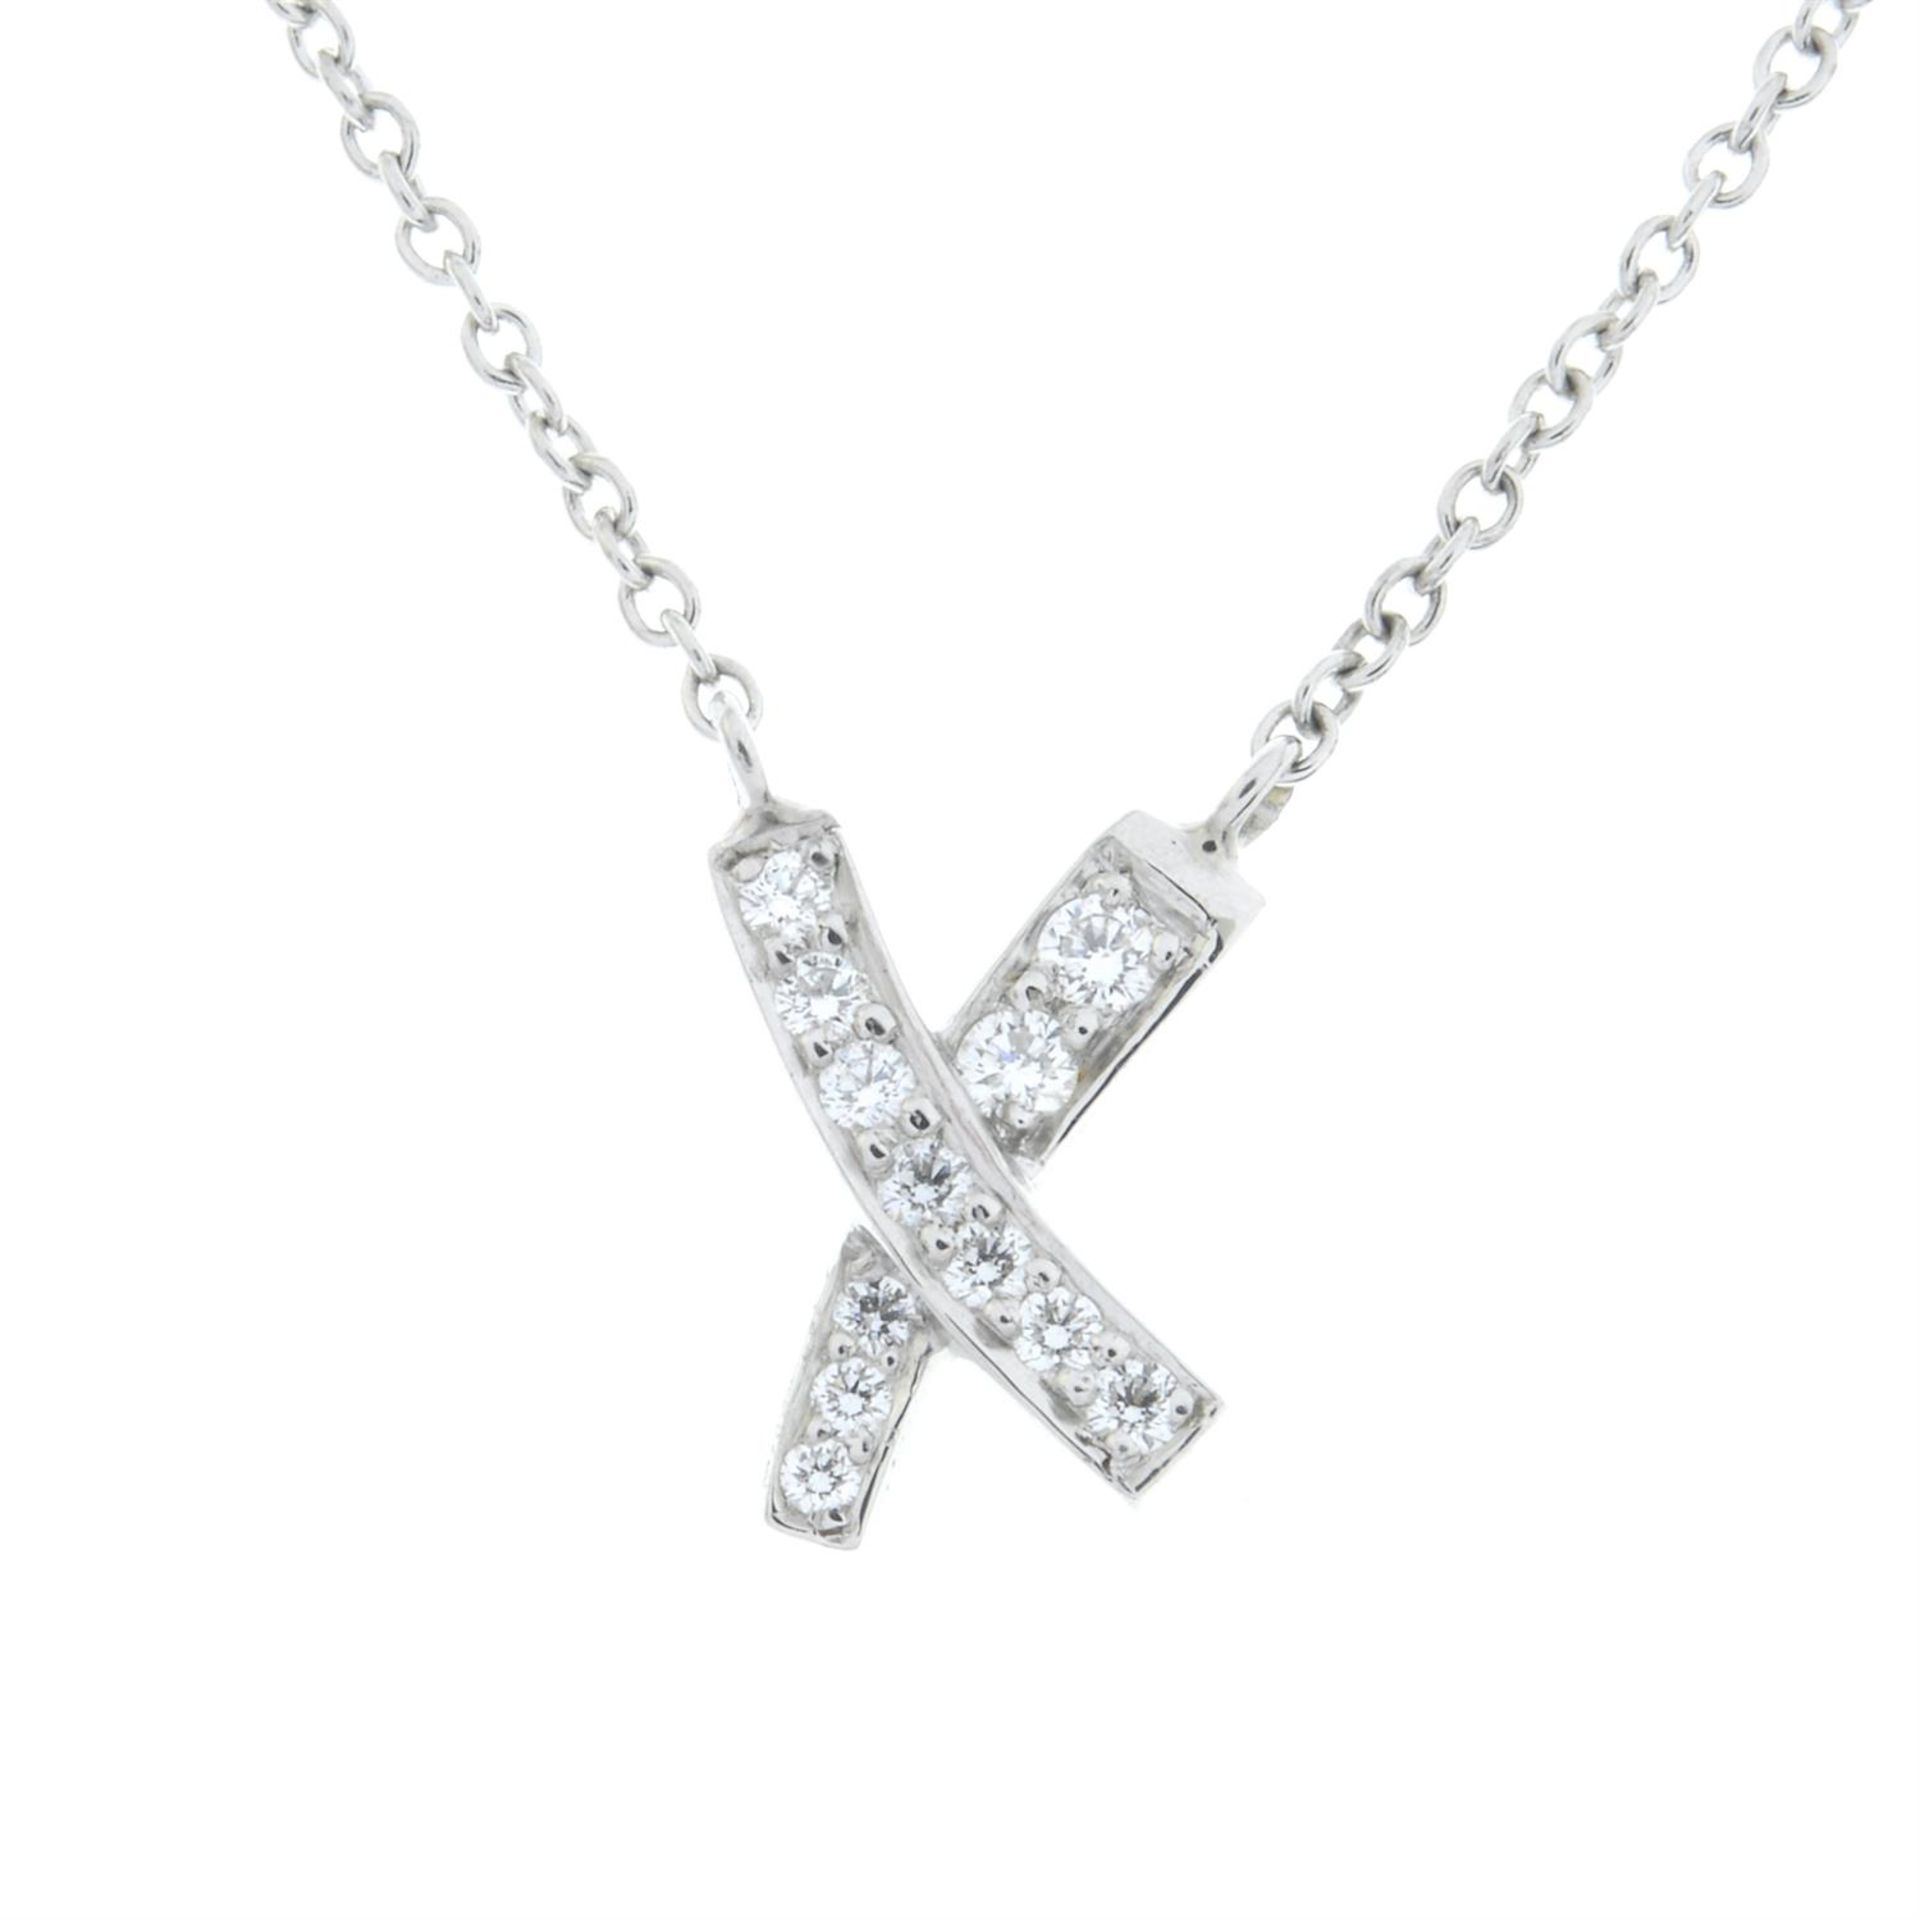 A diamond 'Kiss' cross pendant, on chain, by Paloma Picasso for Tiffany & Co. - Image 2 of 4